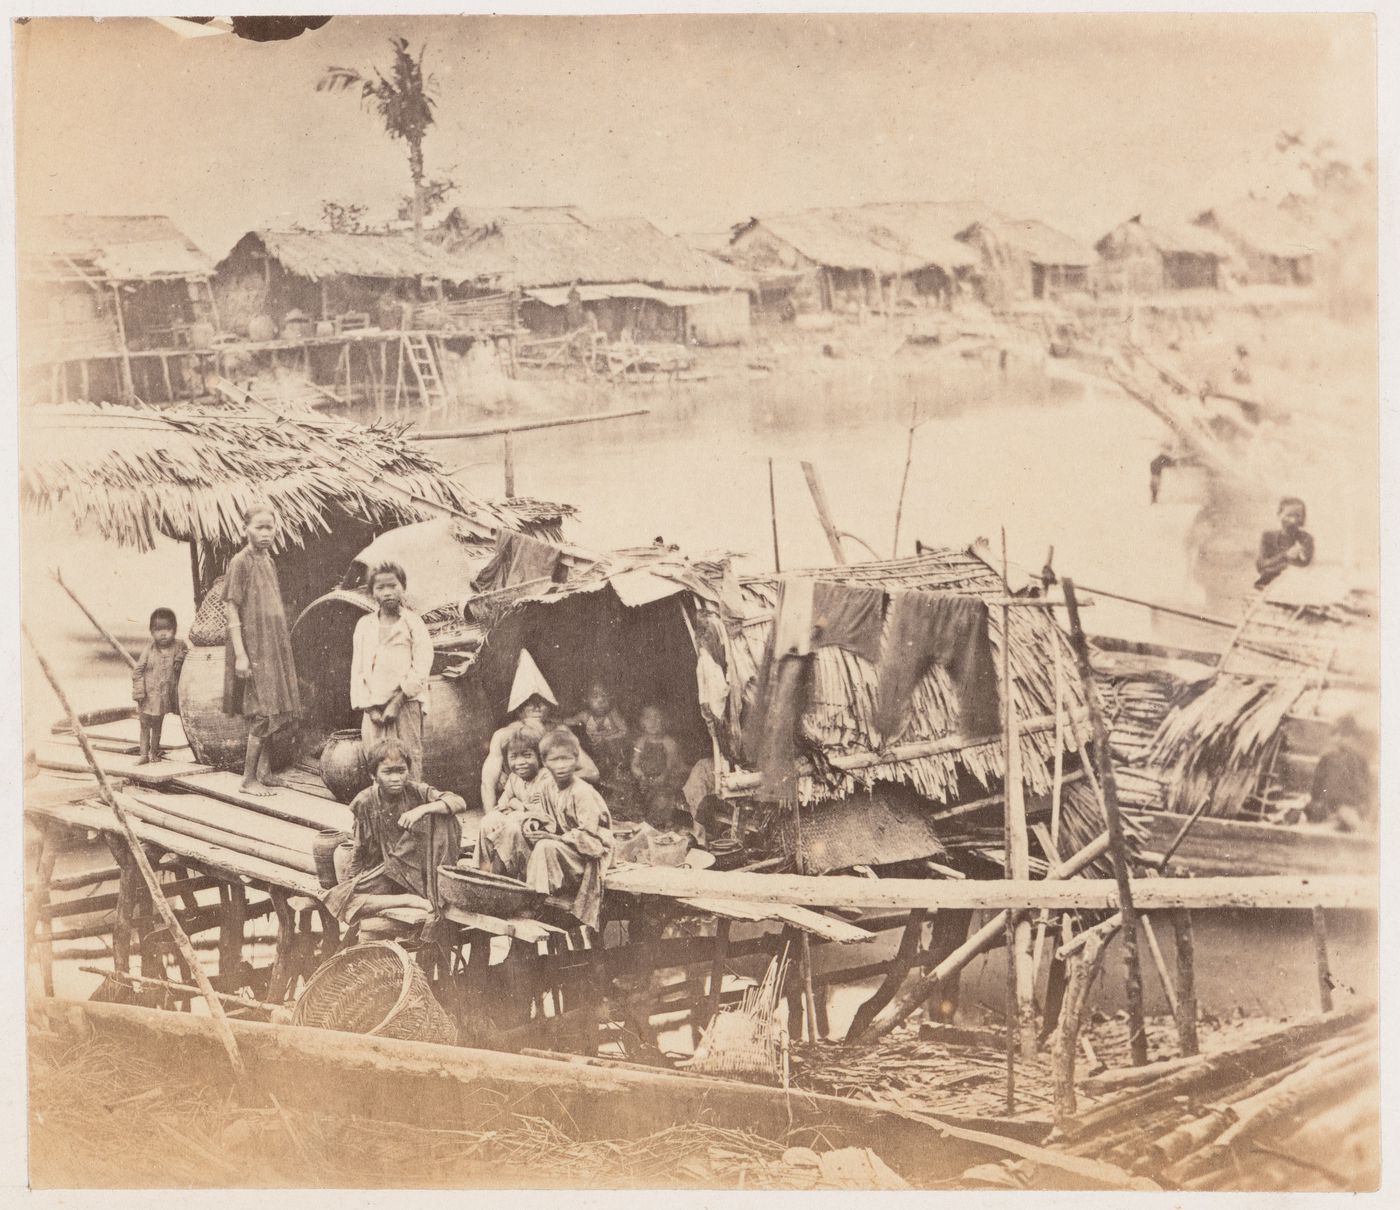 View of people on a wharf showing stilt houses, sampans and a river, Cholon (now Cho Lon), Cochin China (now in Vietnam)